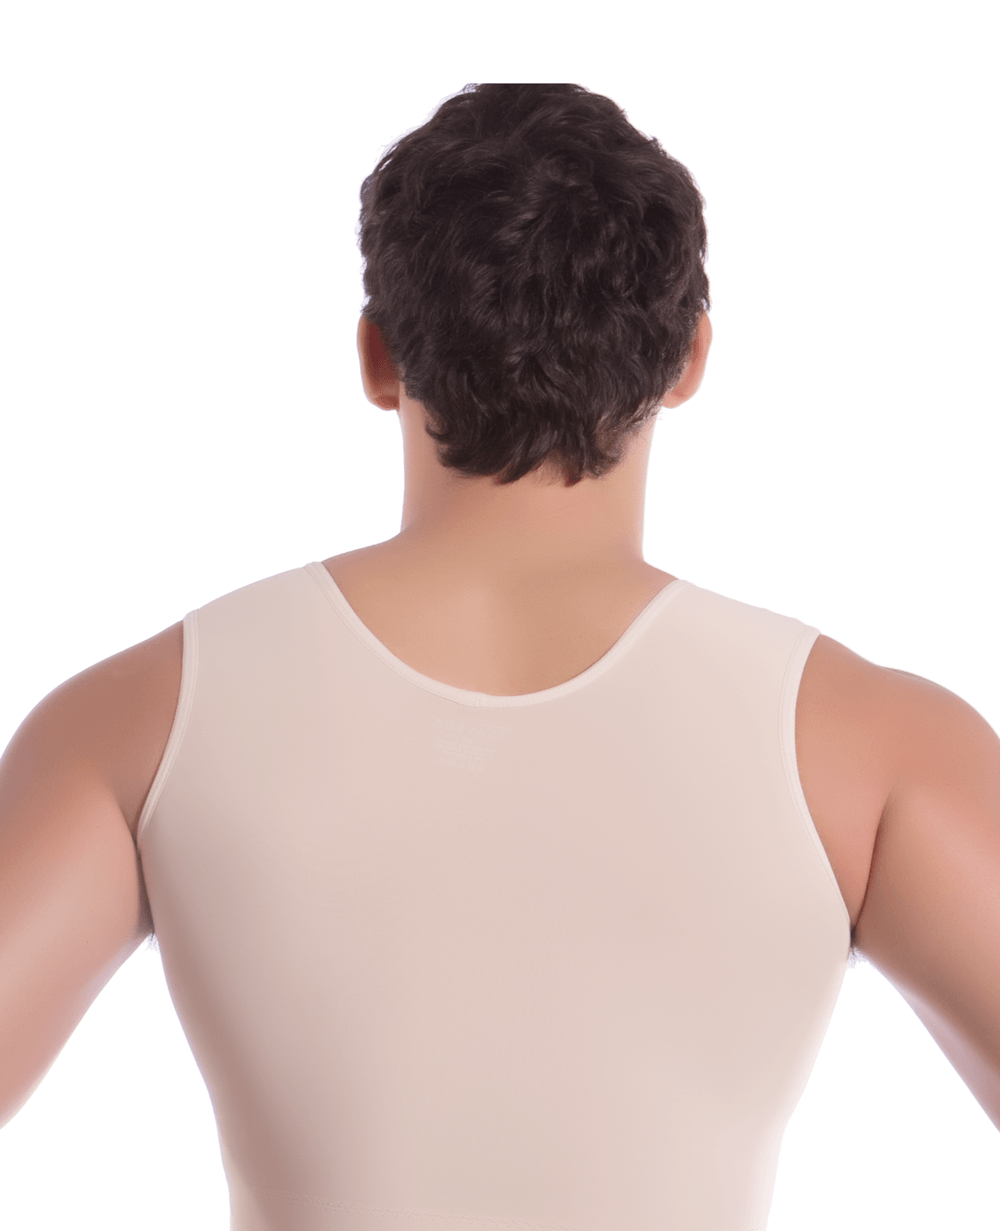 Male Full Body Above Knee Length Abdominal Cosmetic Surgery Compression Garment with Zipper (Sleeveless) (MG02) - Isavela Compression Garments